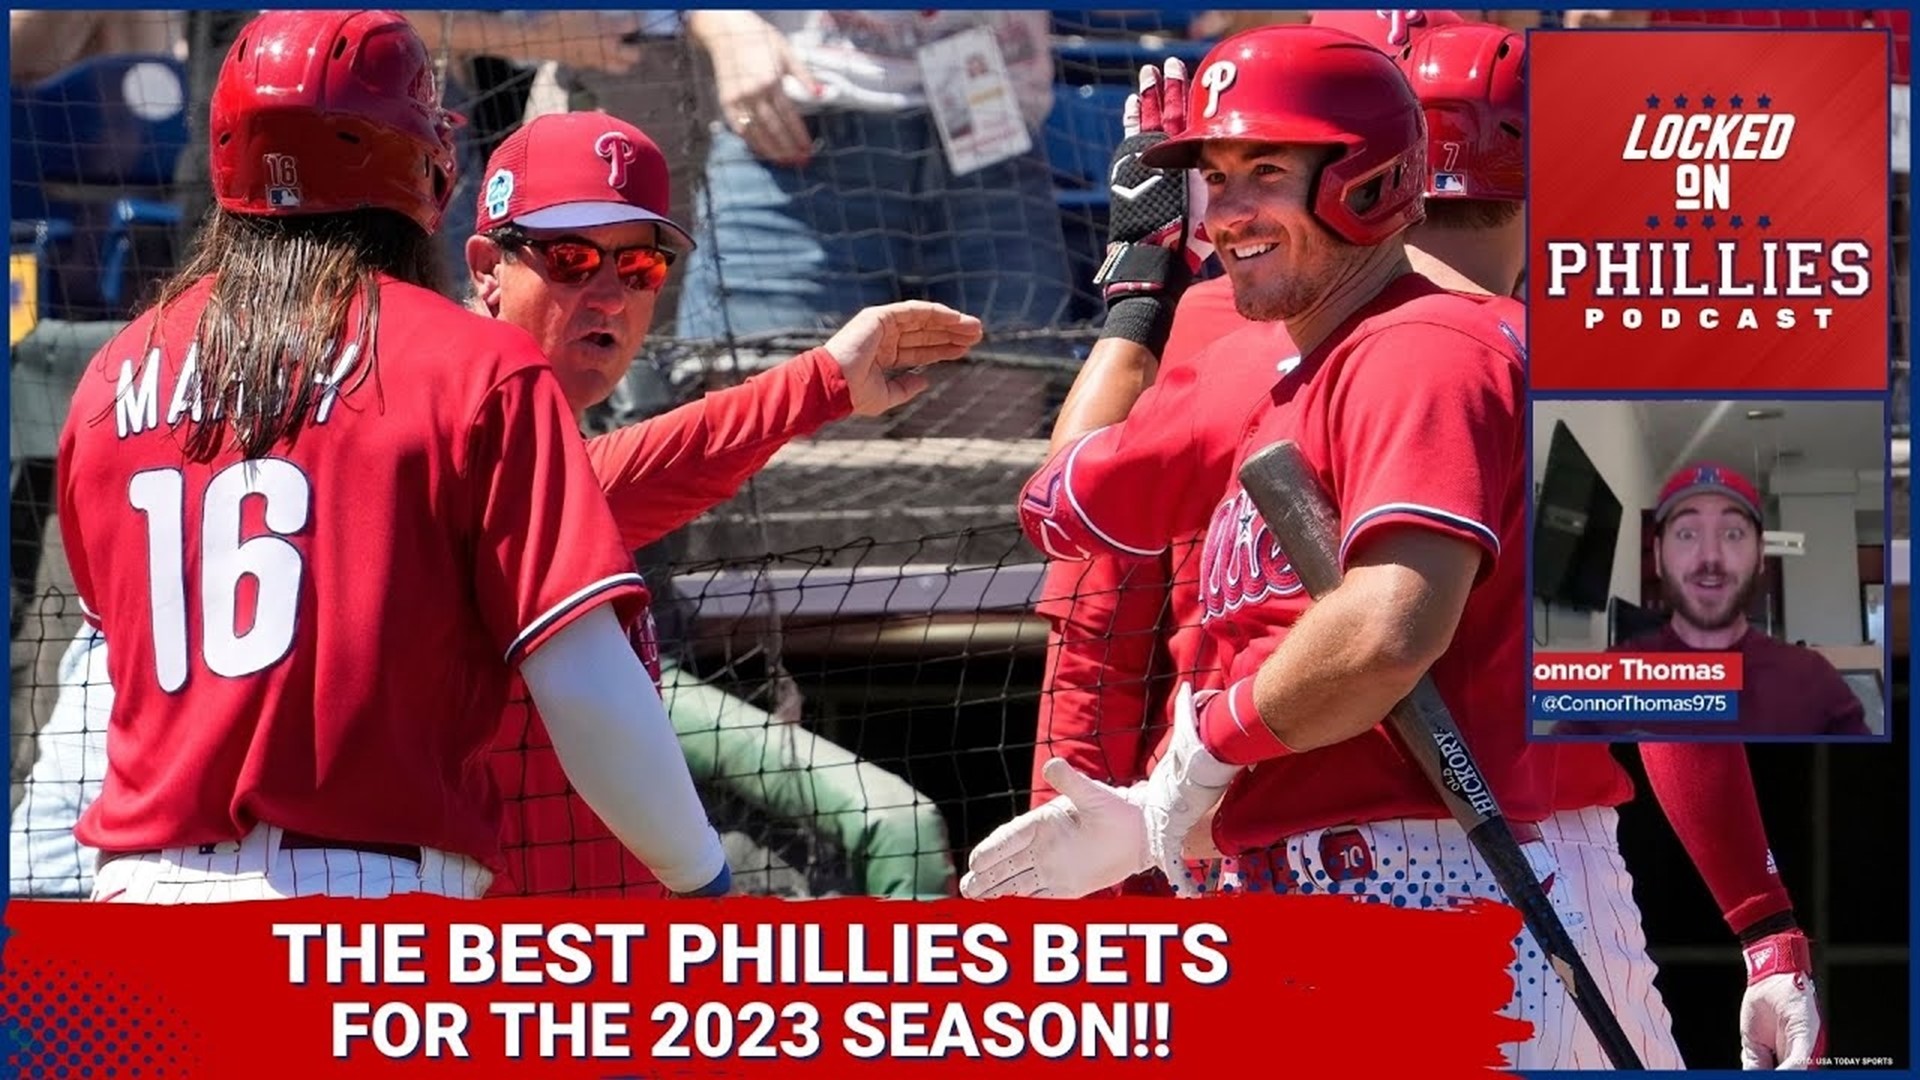 In today's episode, Connor runs through some of the top bets for the Philadelphia Phillies' season, starting with a great opportunity in the NL East.